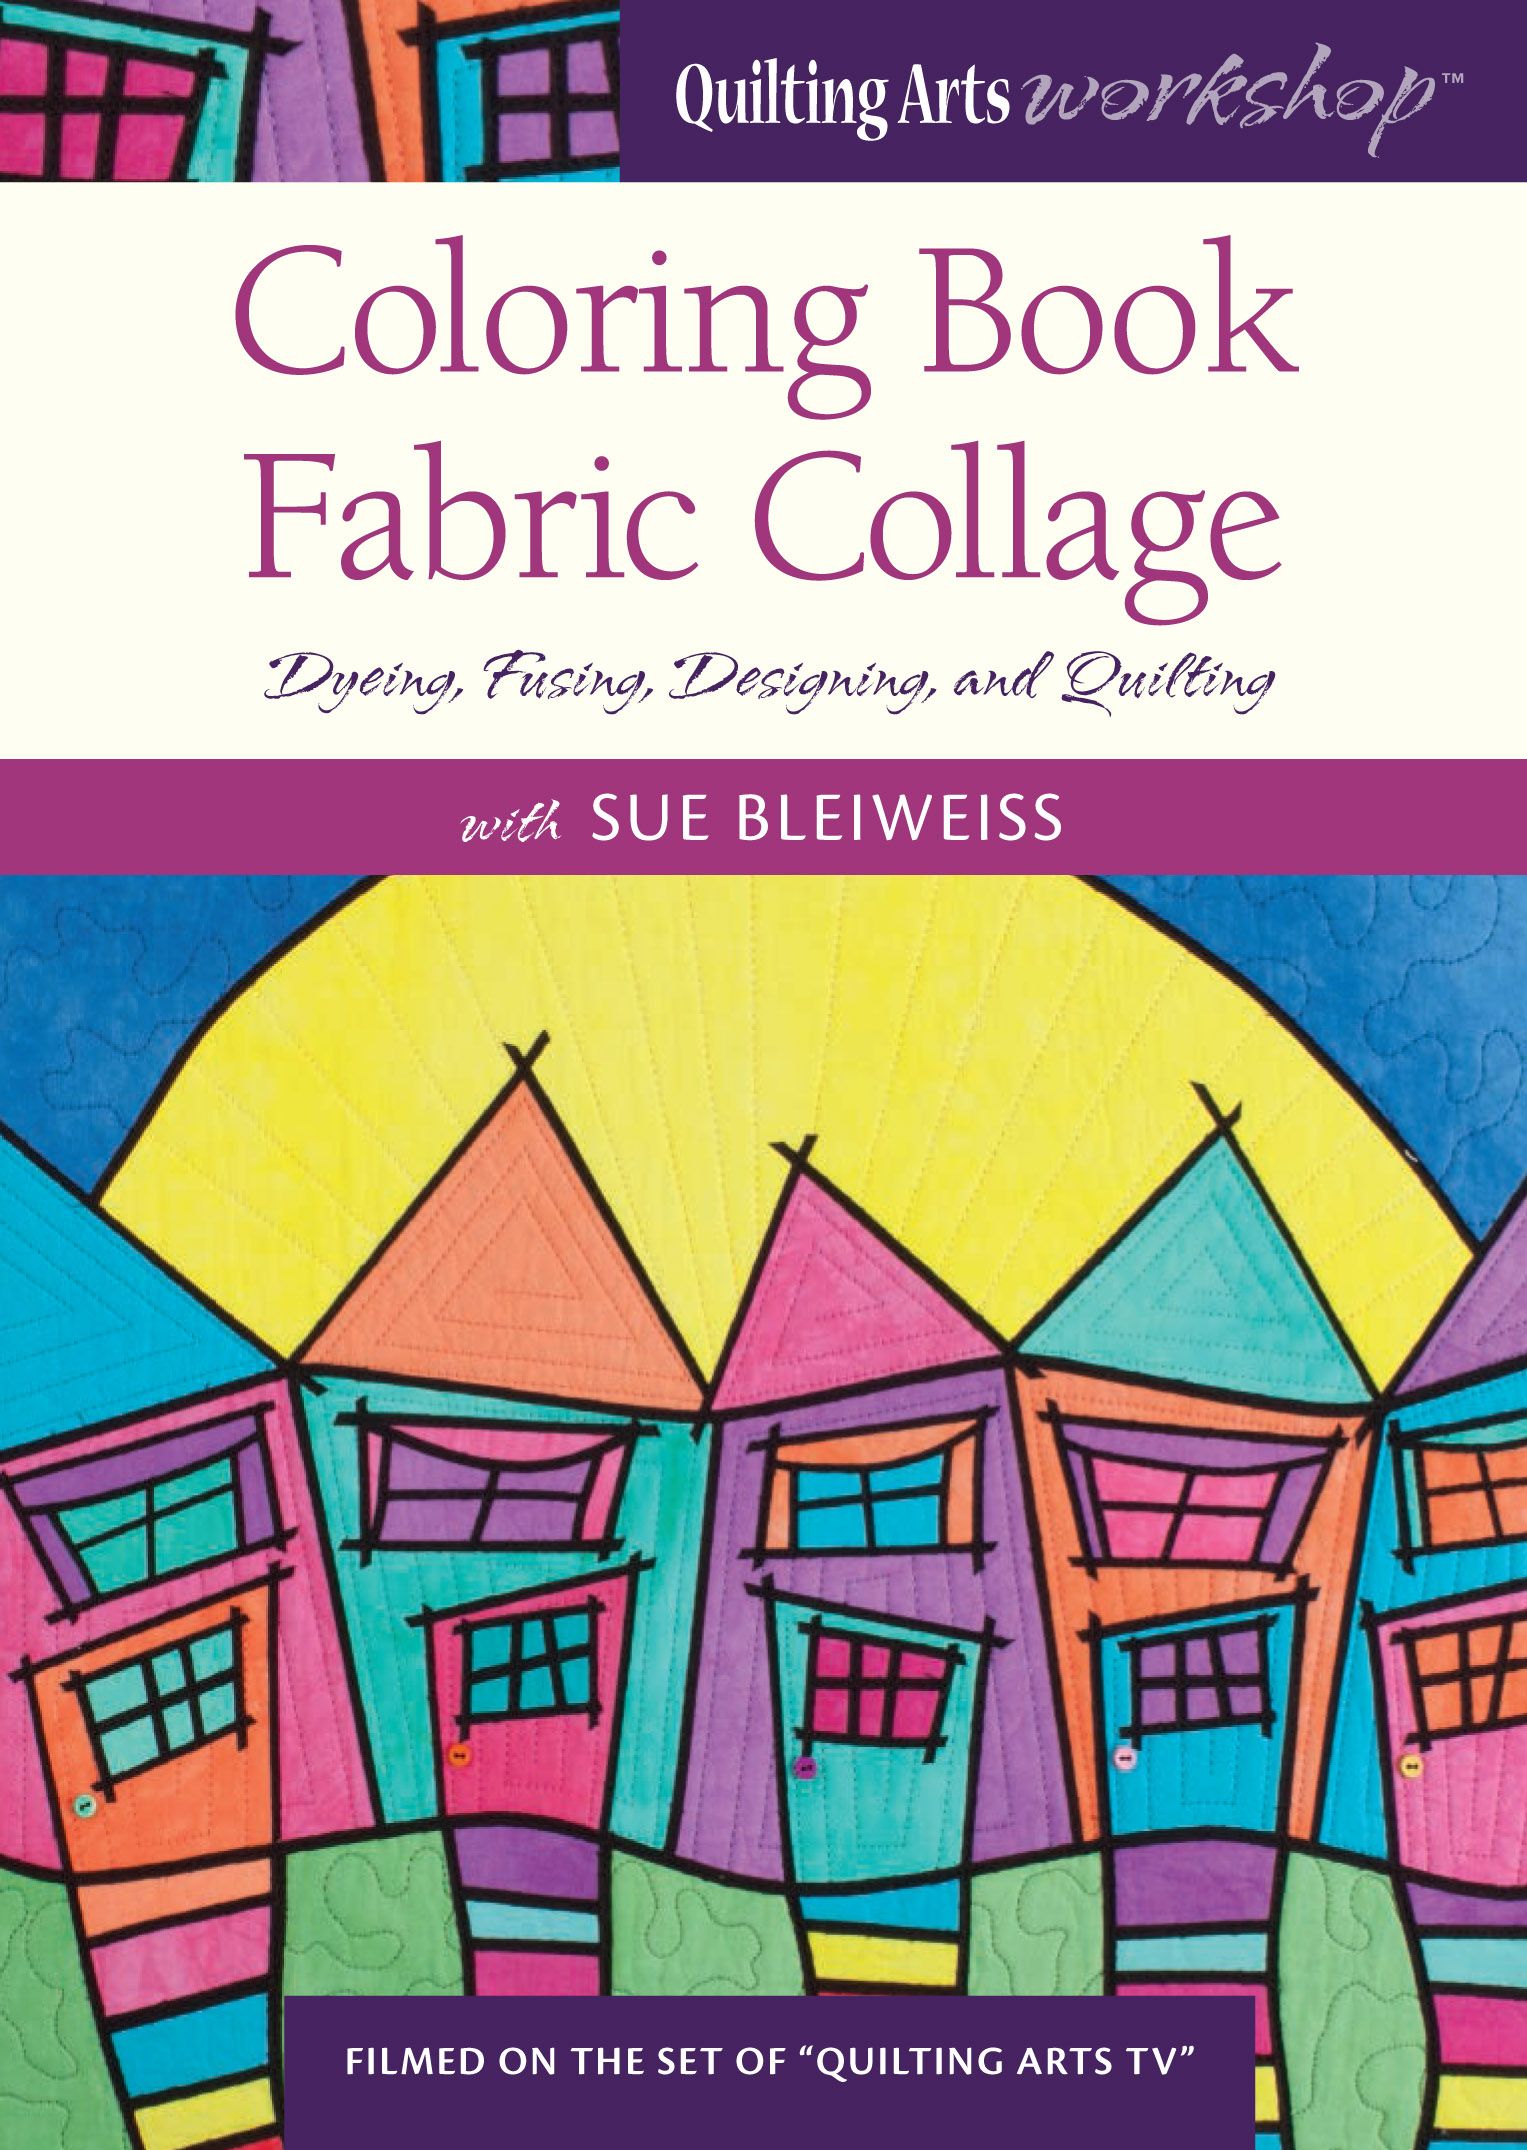 Download Coloring Book Fabric Collage With Sue Bleiweiss Video Download Quilting Daily